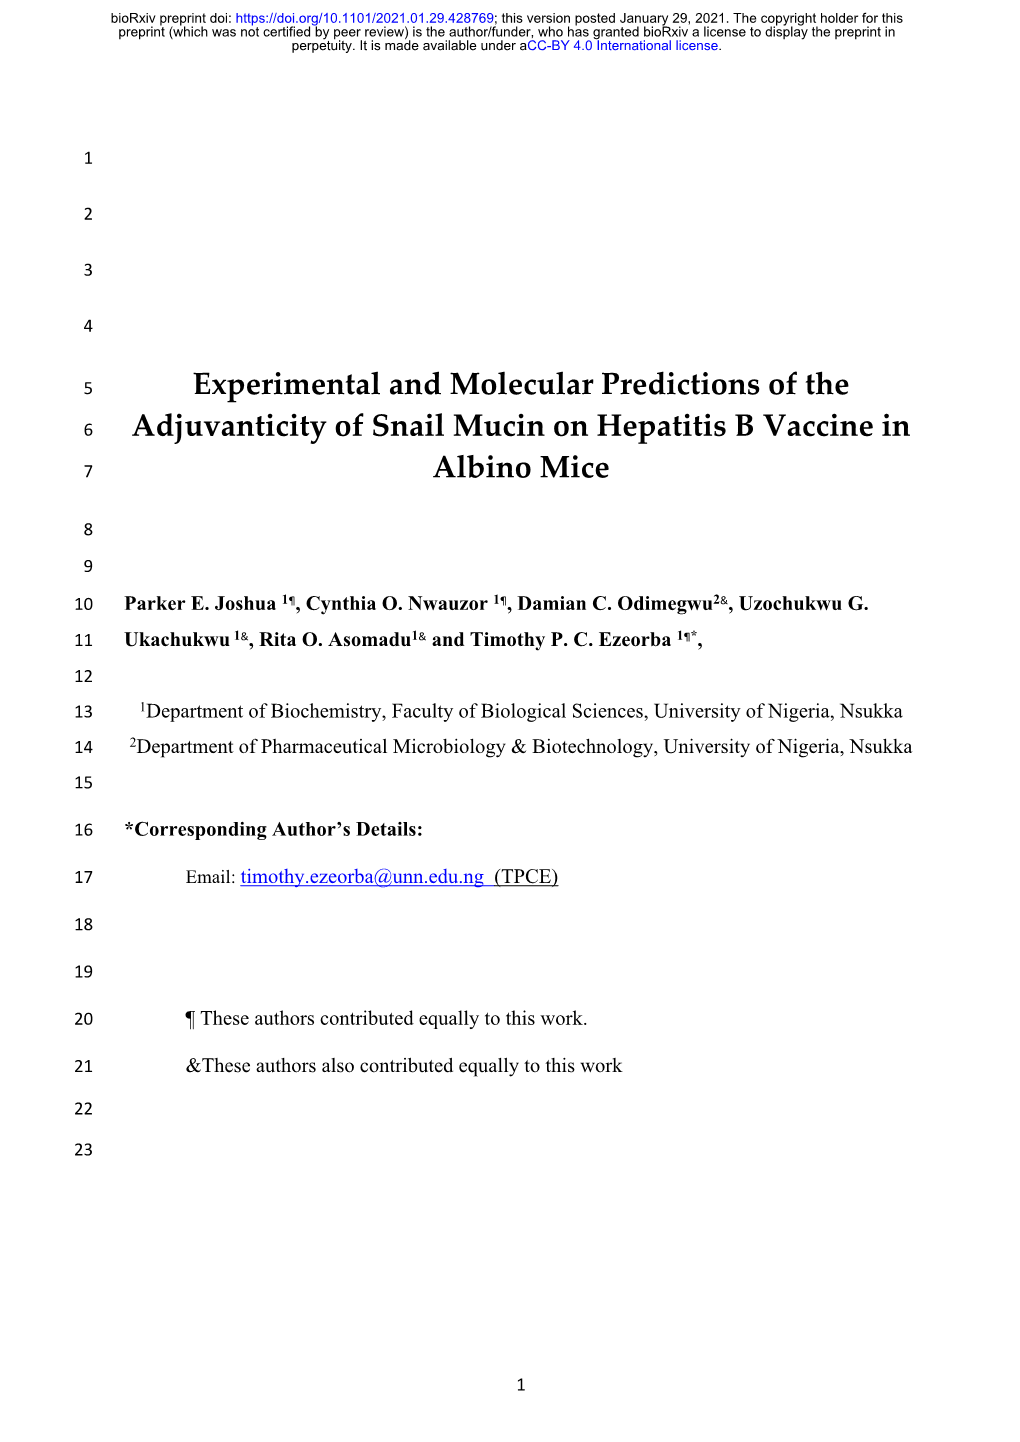 Experimental and Molecular Predictions of the Adjuvanticity Of